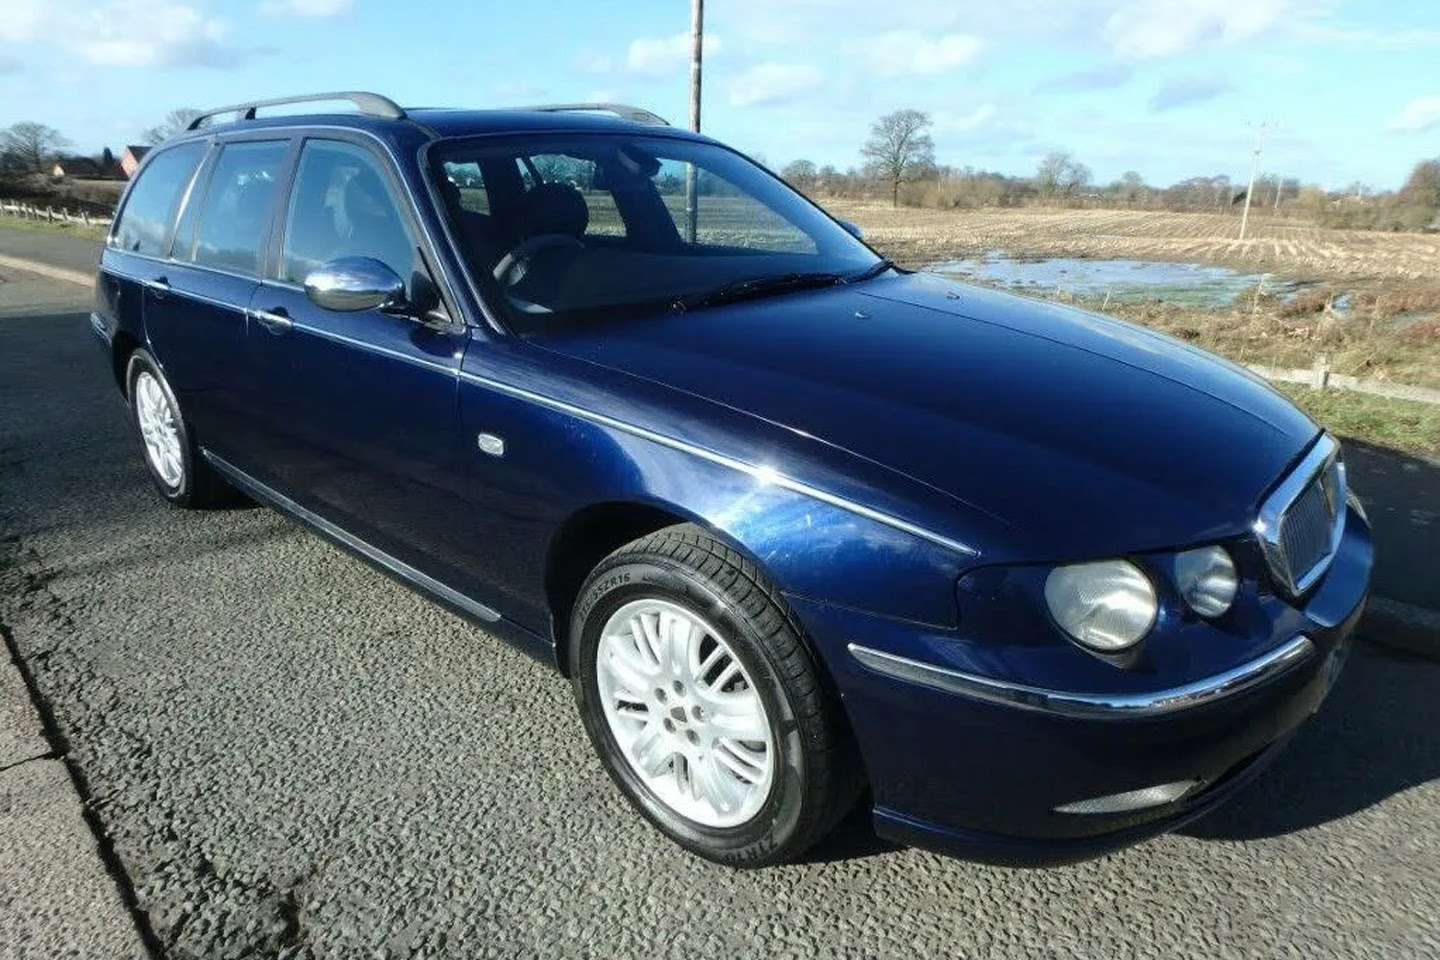 Rover 75 Tourer | Shed of the Week